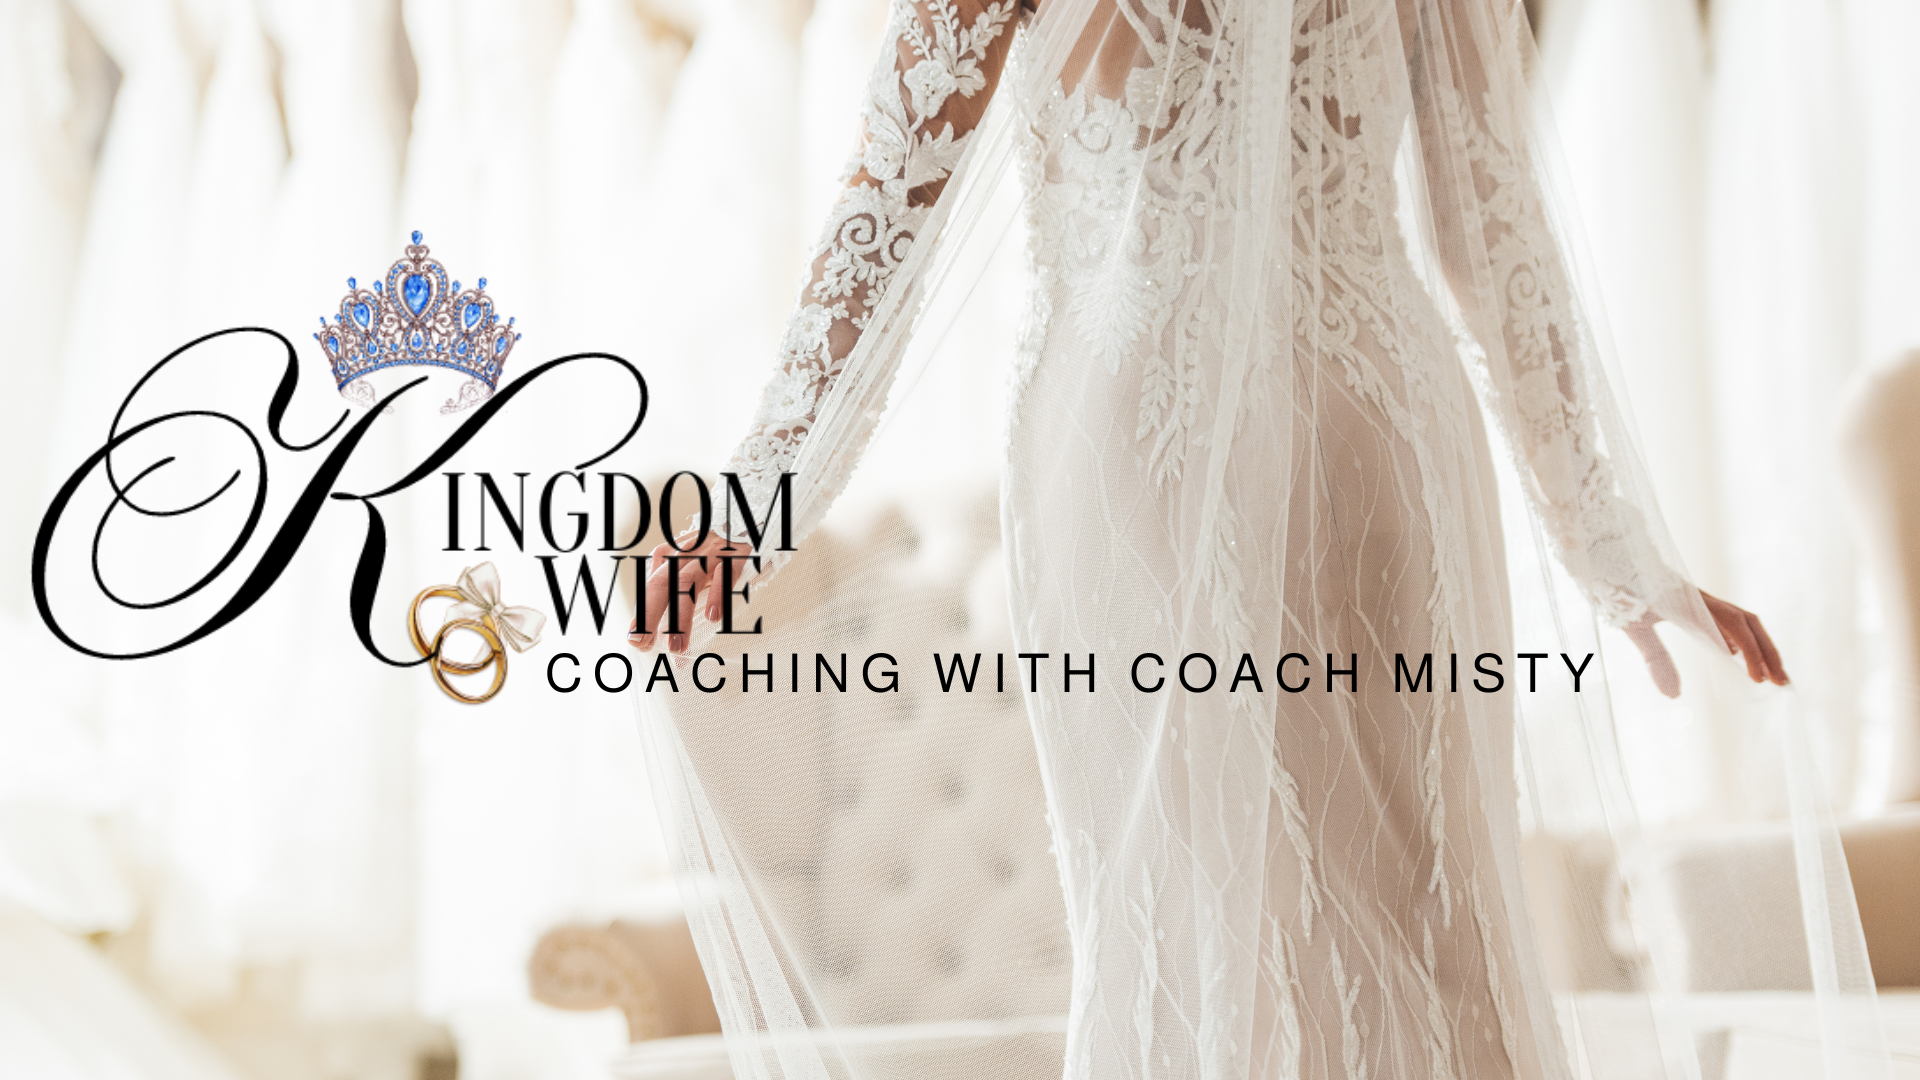 From Miss To Mrs: Kingdom Wife